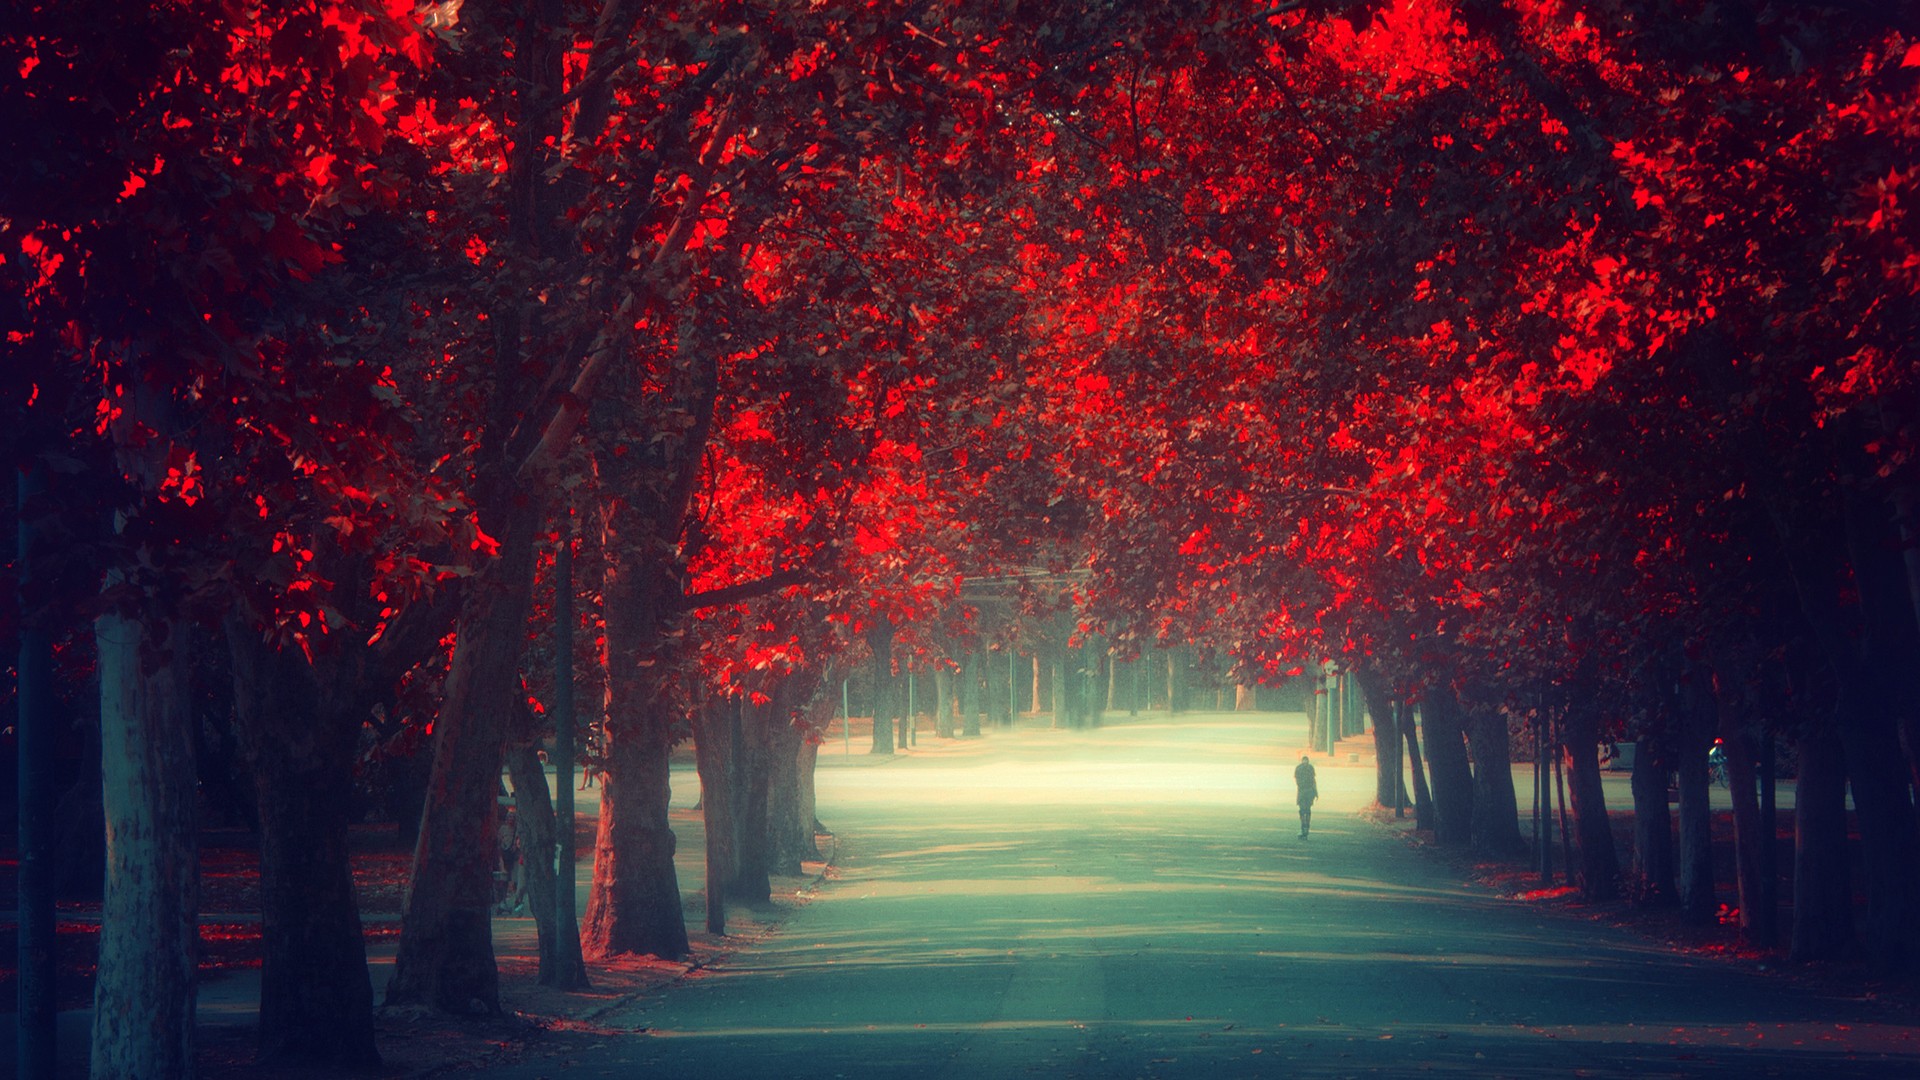 Trees Autumn Season Red Leaves Remembrance Wallpaper